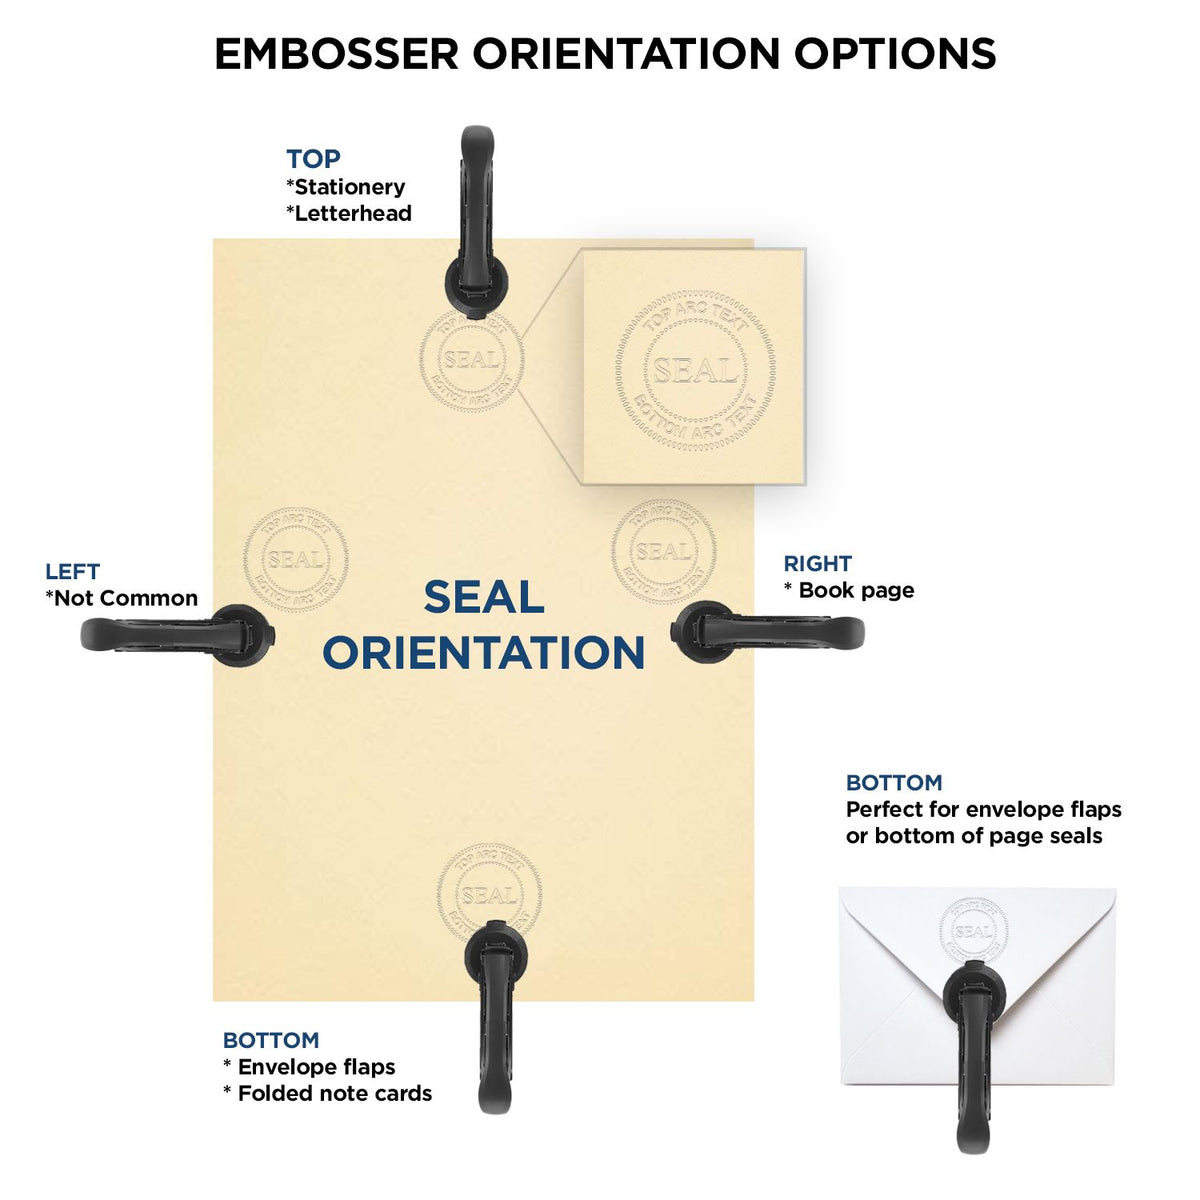 An infographic for the Handheld Wyoming Architect Seal Embosser showing embosser orientation, this is showing examples of a top, bottom, right and left insert.